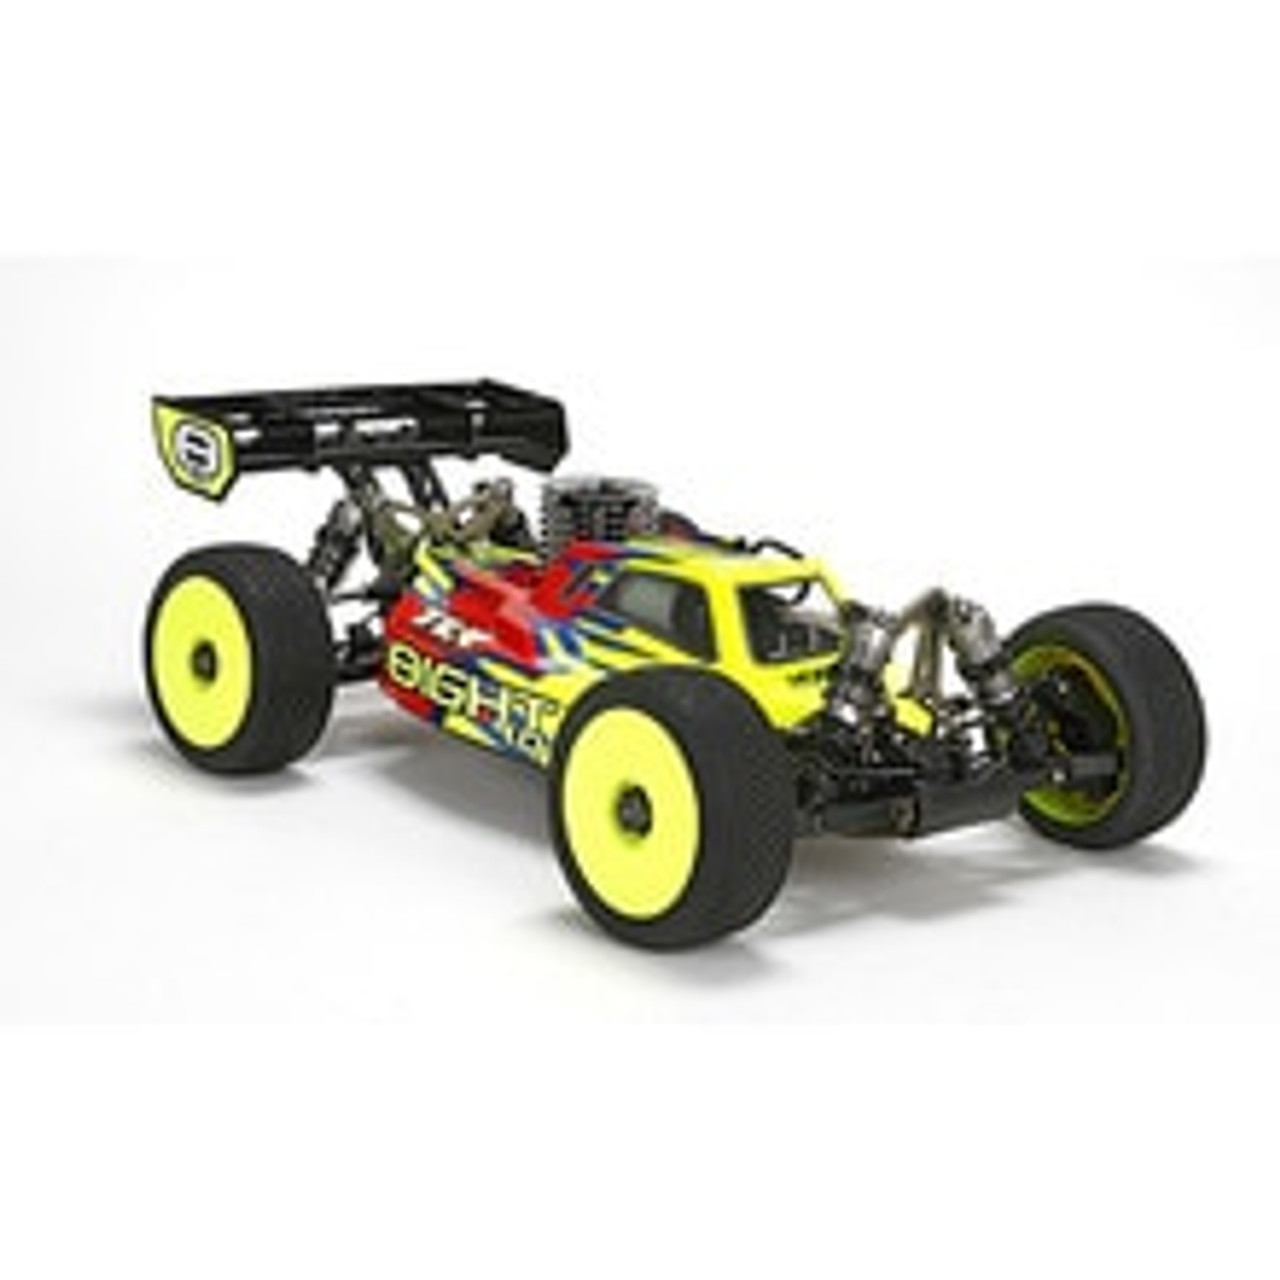 TLR 8IGHT 4.0 1/8 4WD Nitro Buggy Kit 